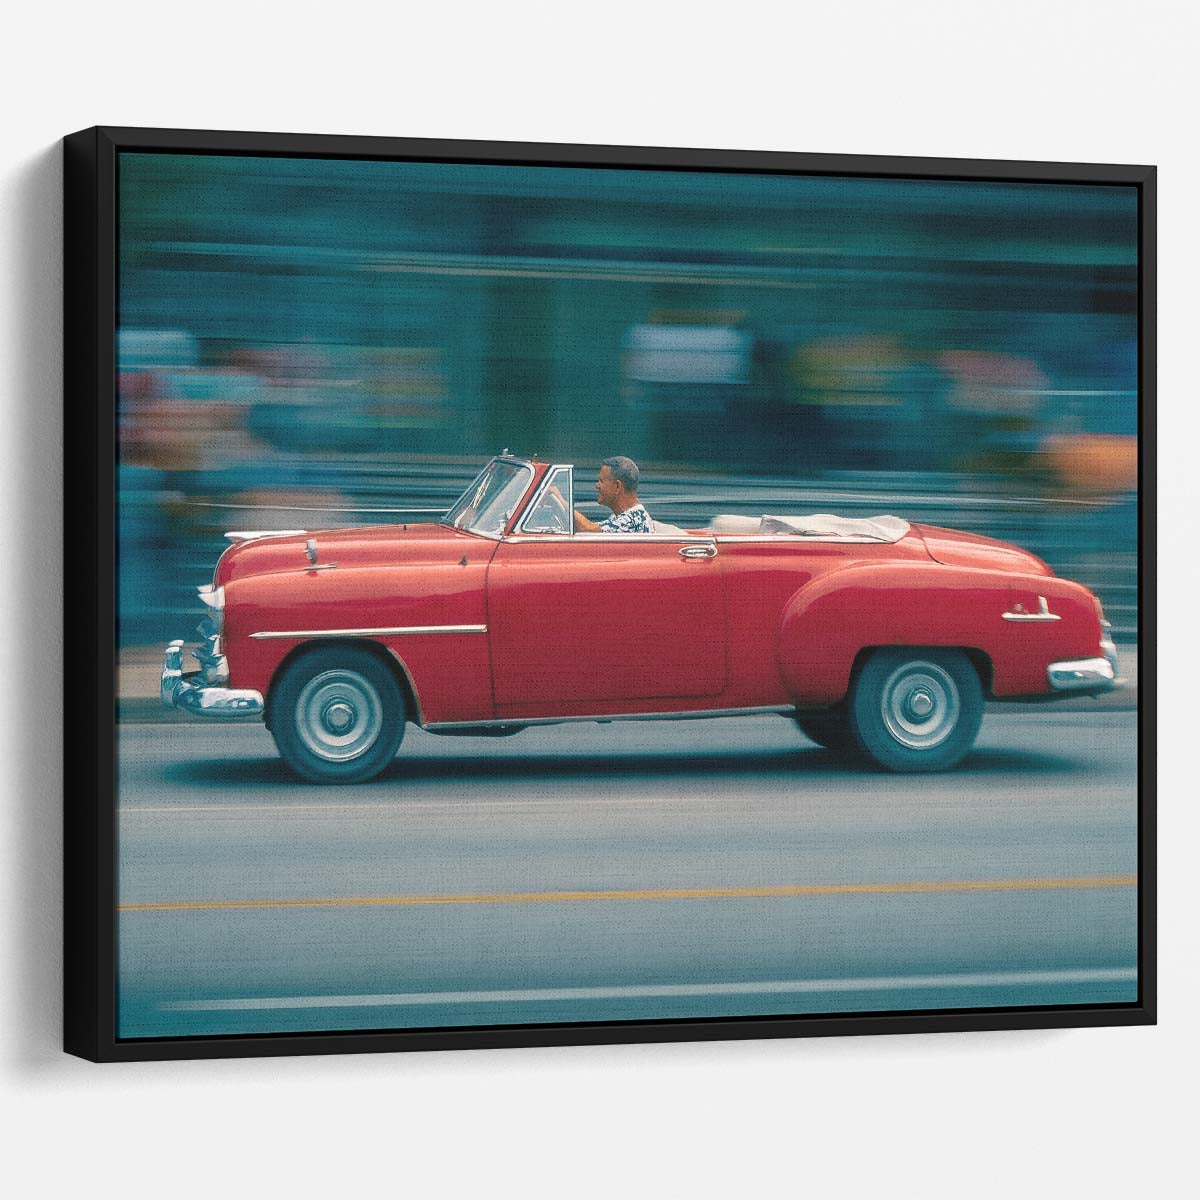 Classic Havana Car in Motion Blur Street Wall Art by Luxuriance Designs. Made in USA.